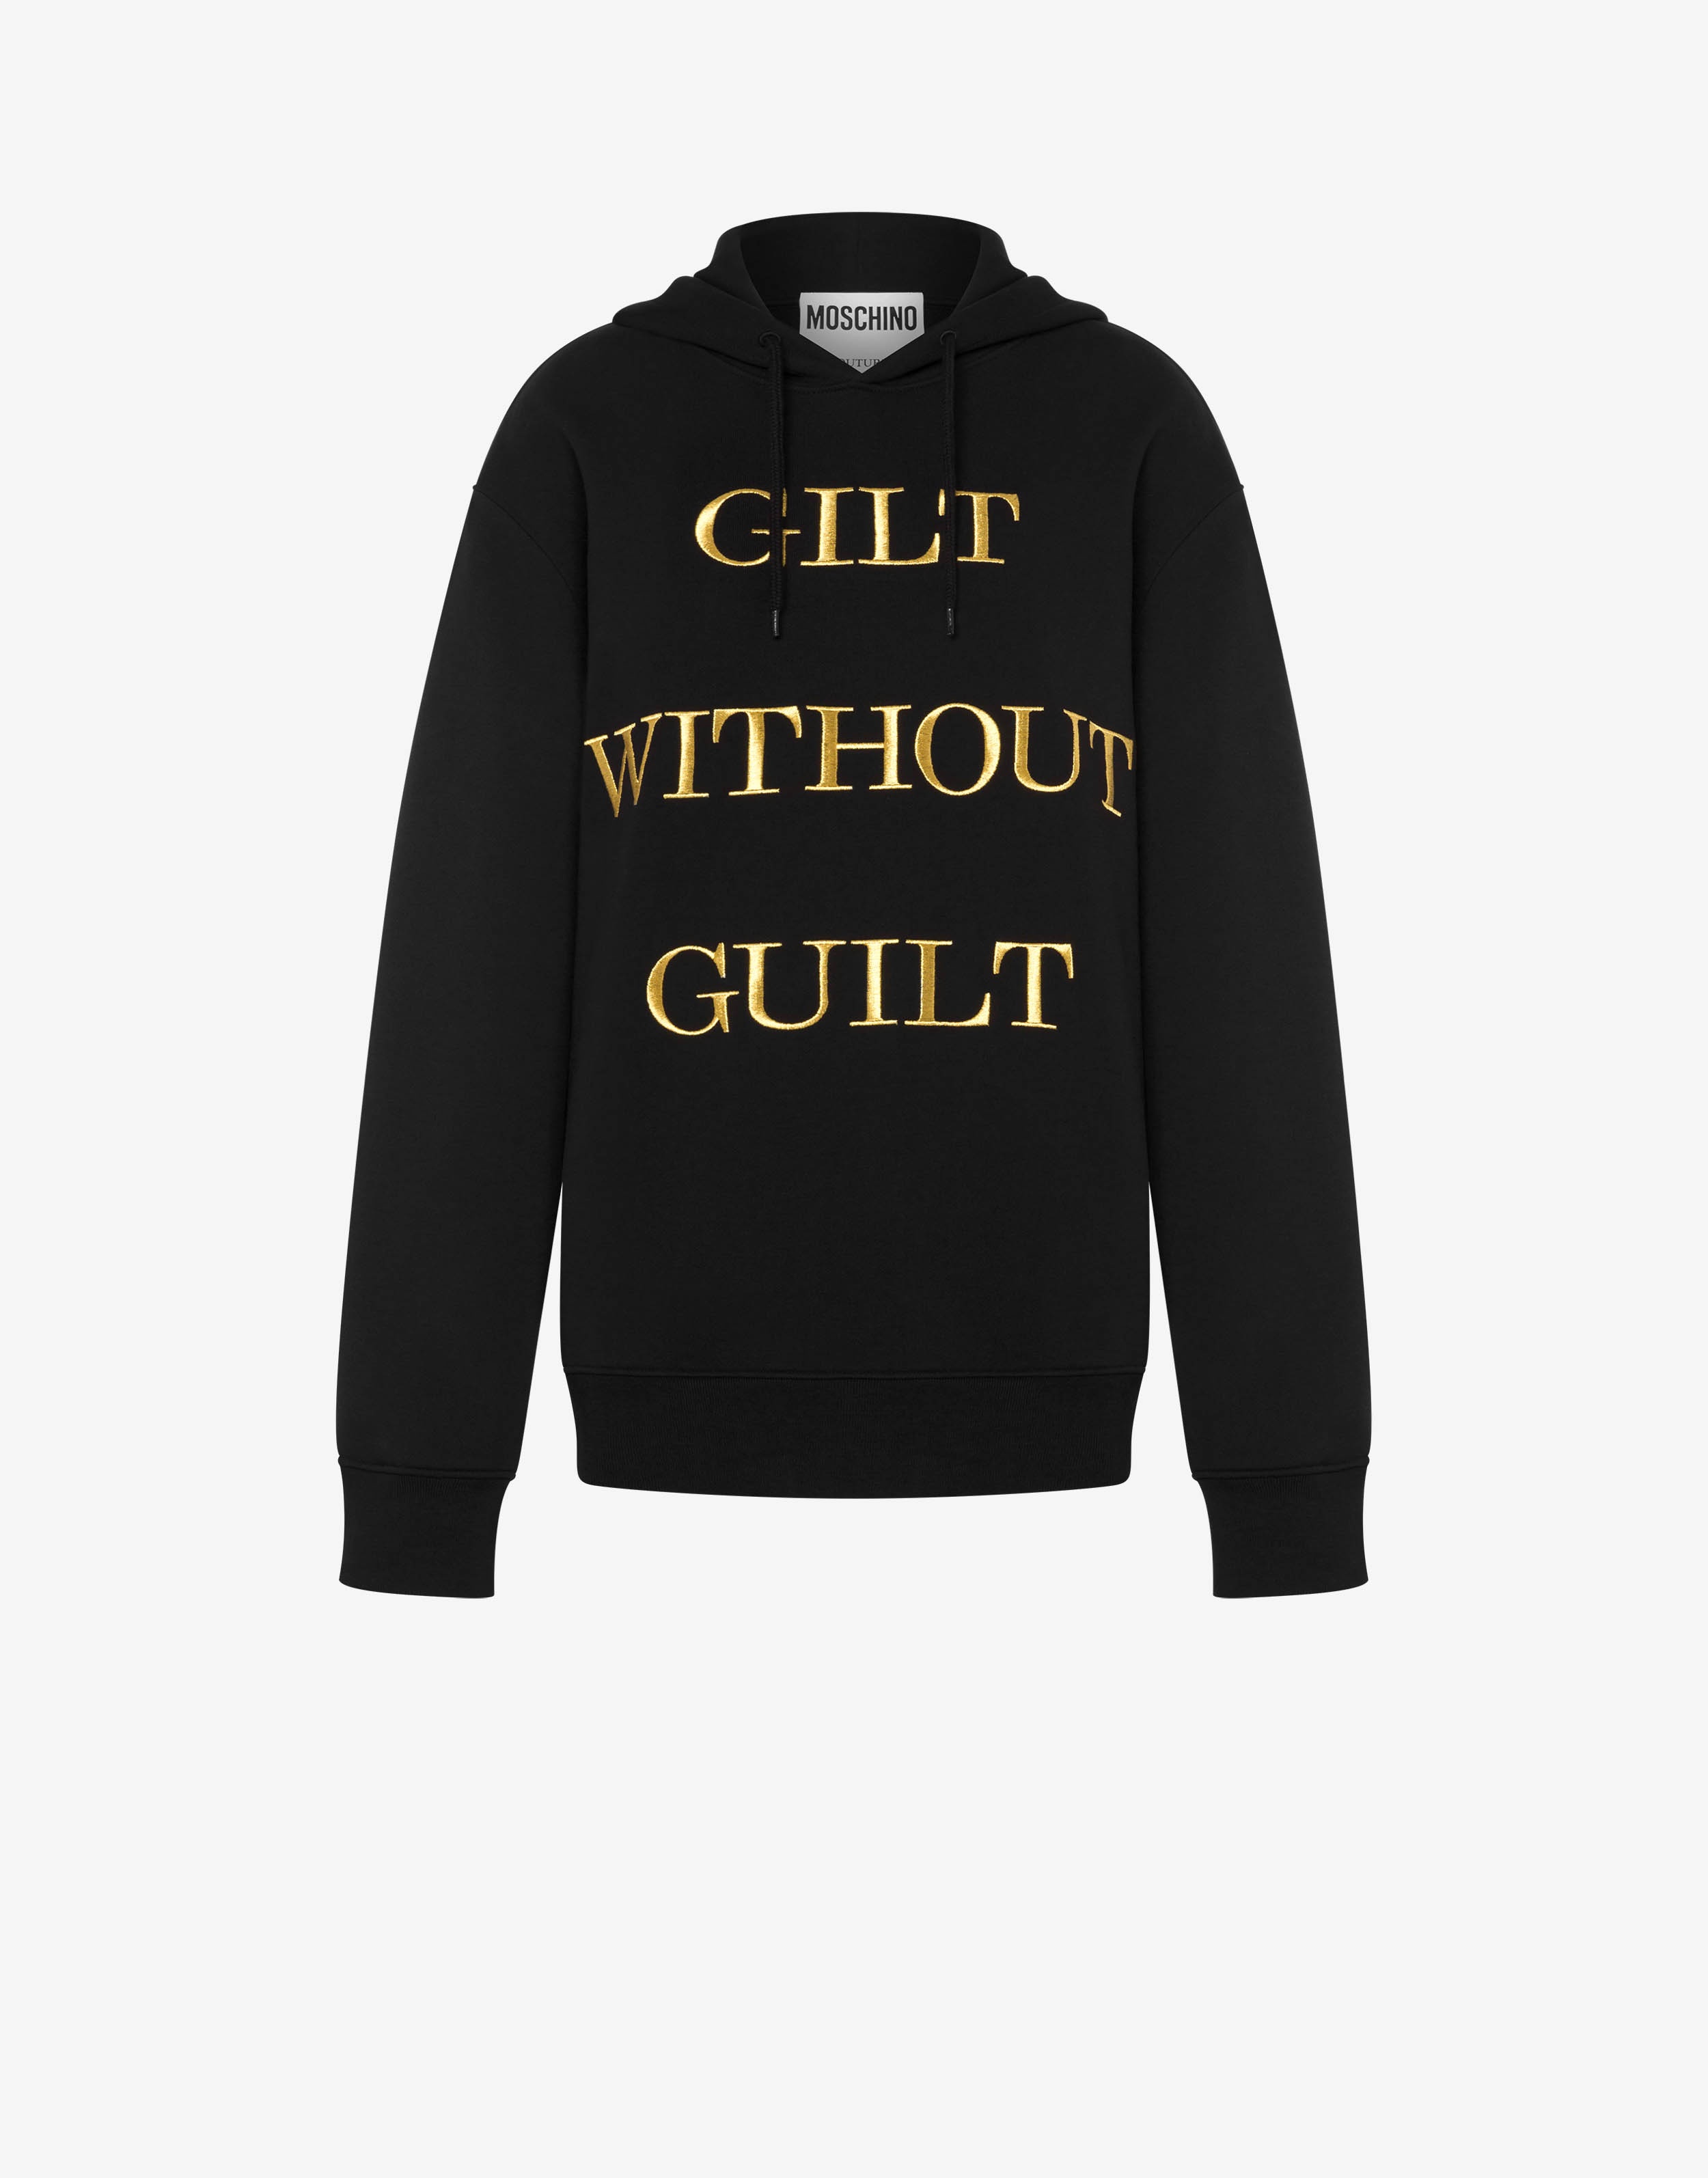 GILT WITHOUT GUILT HOODIE - 1